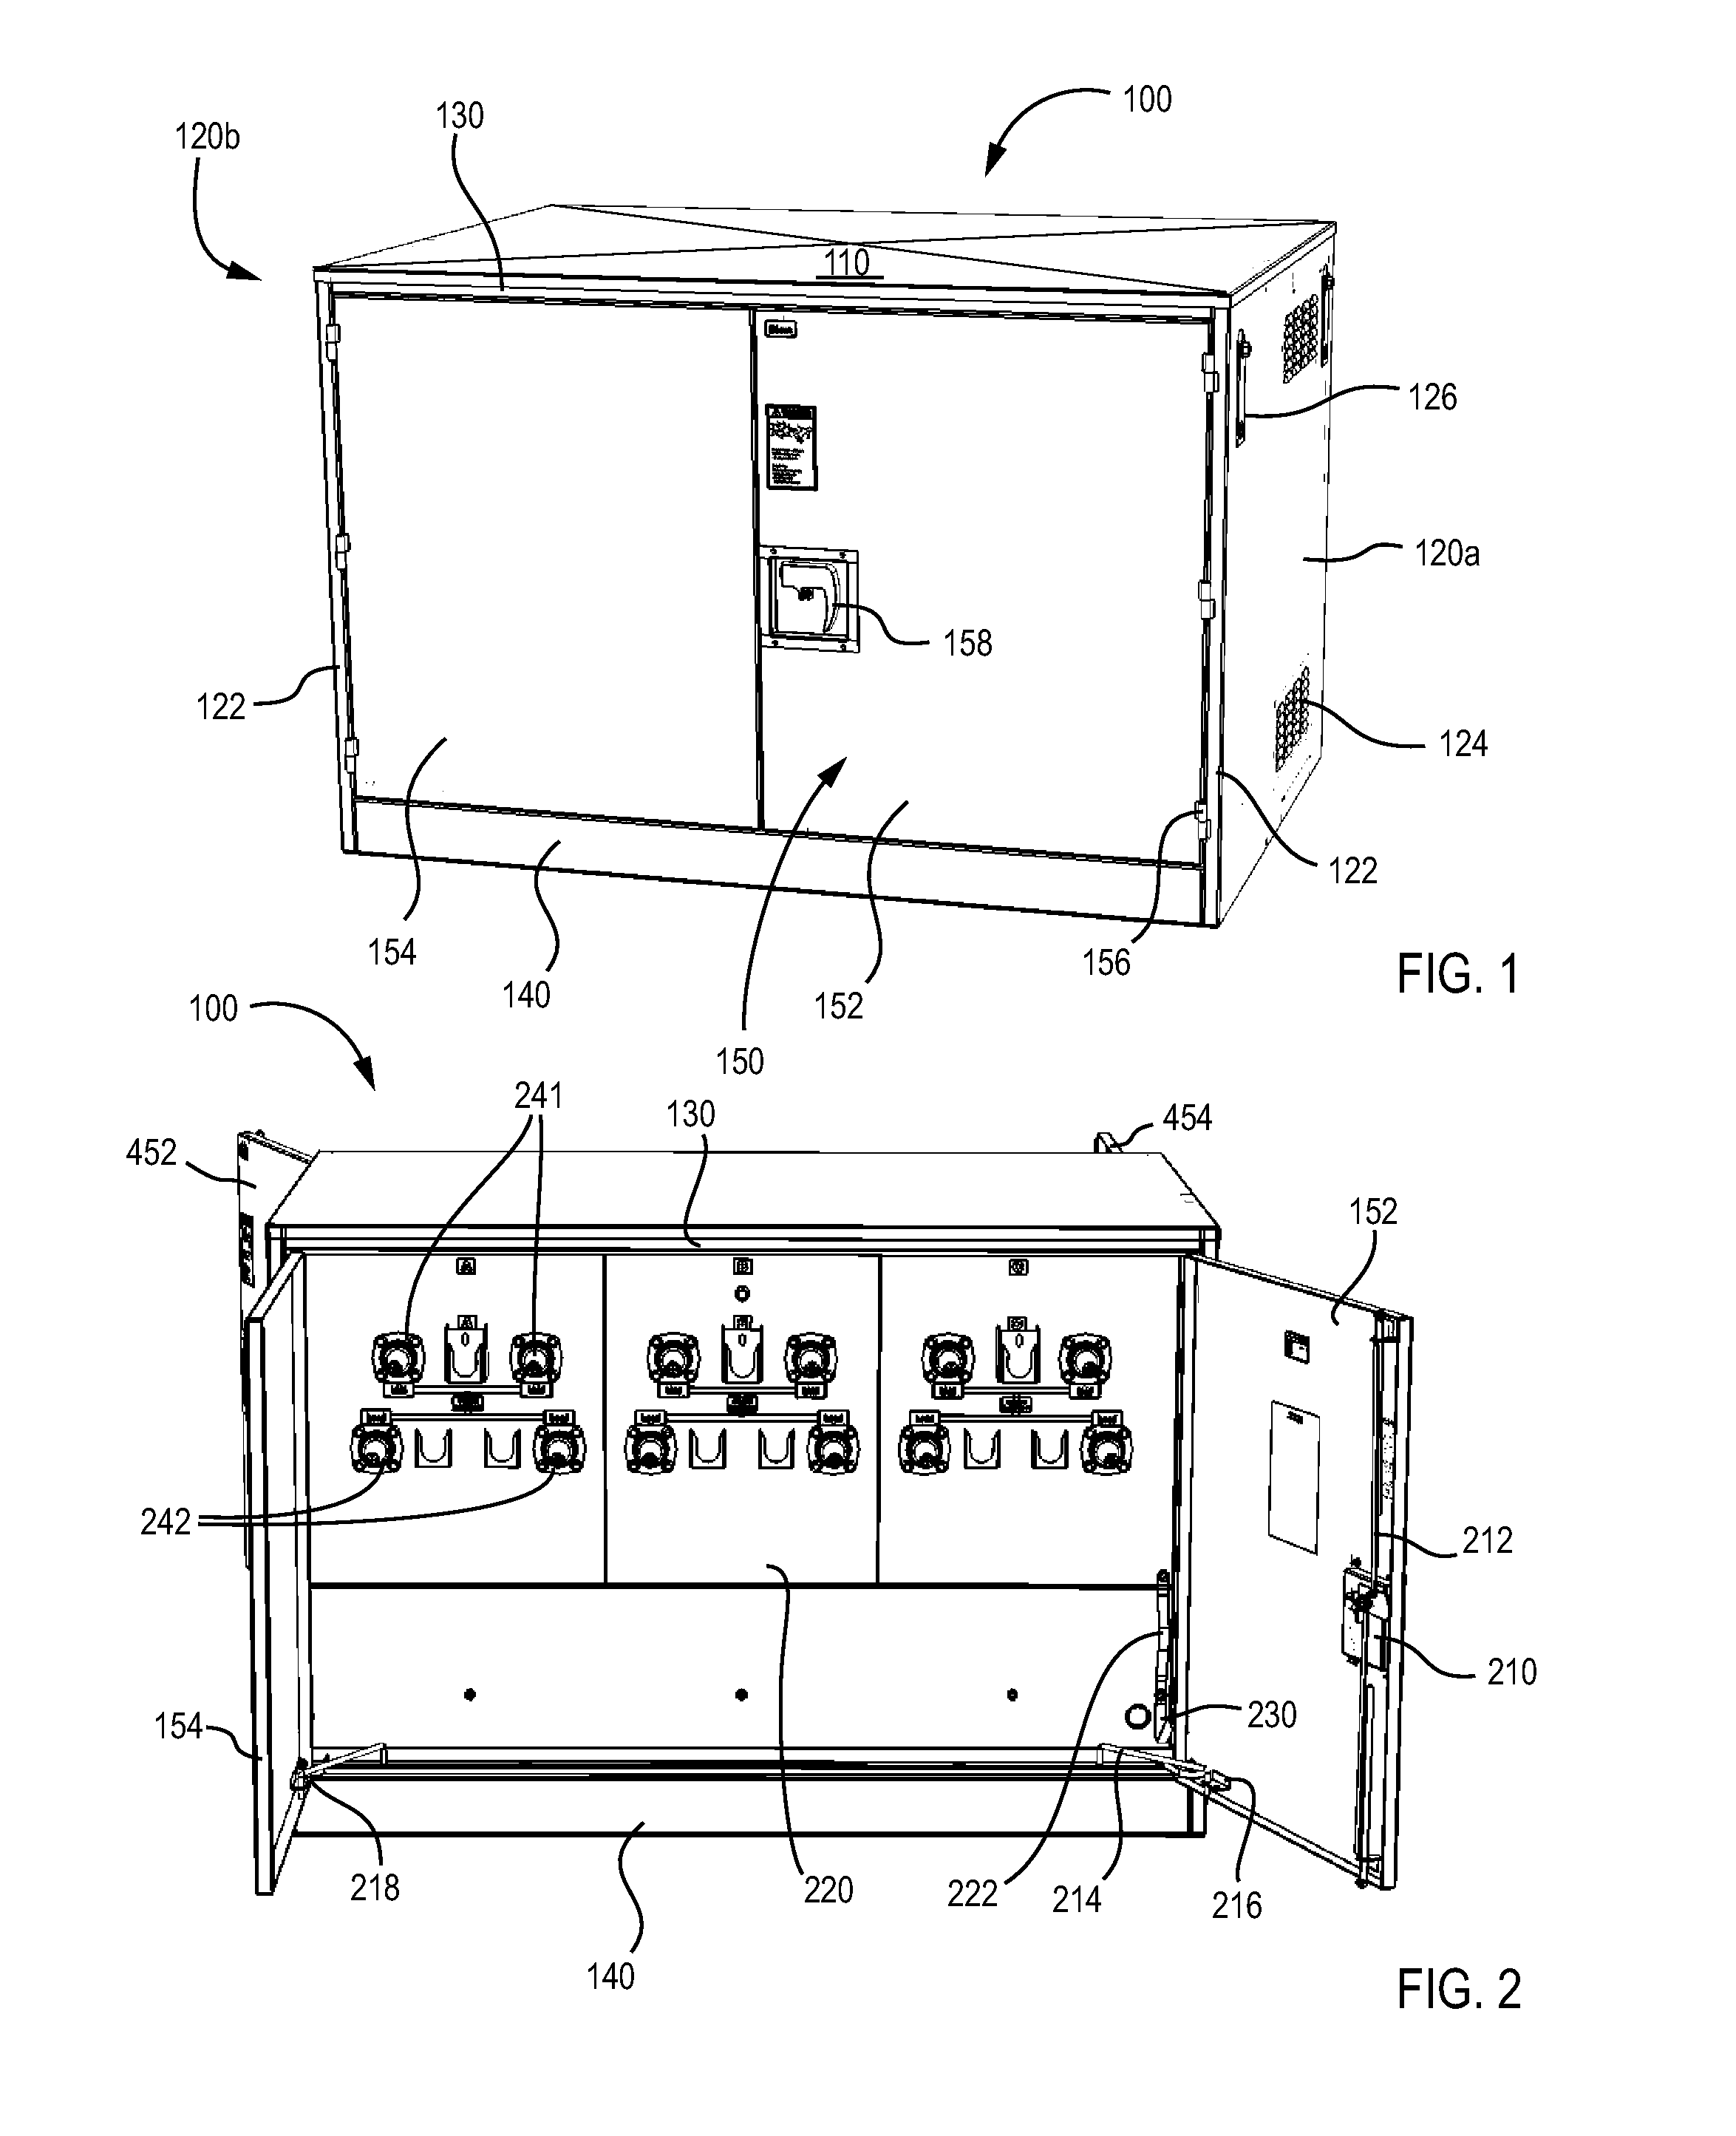 Enclosure system and method for facilitating installation of electrical equipment